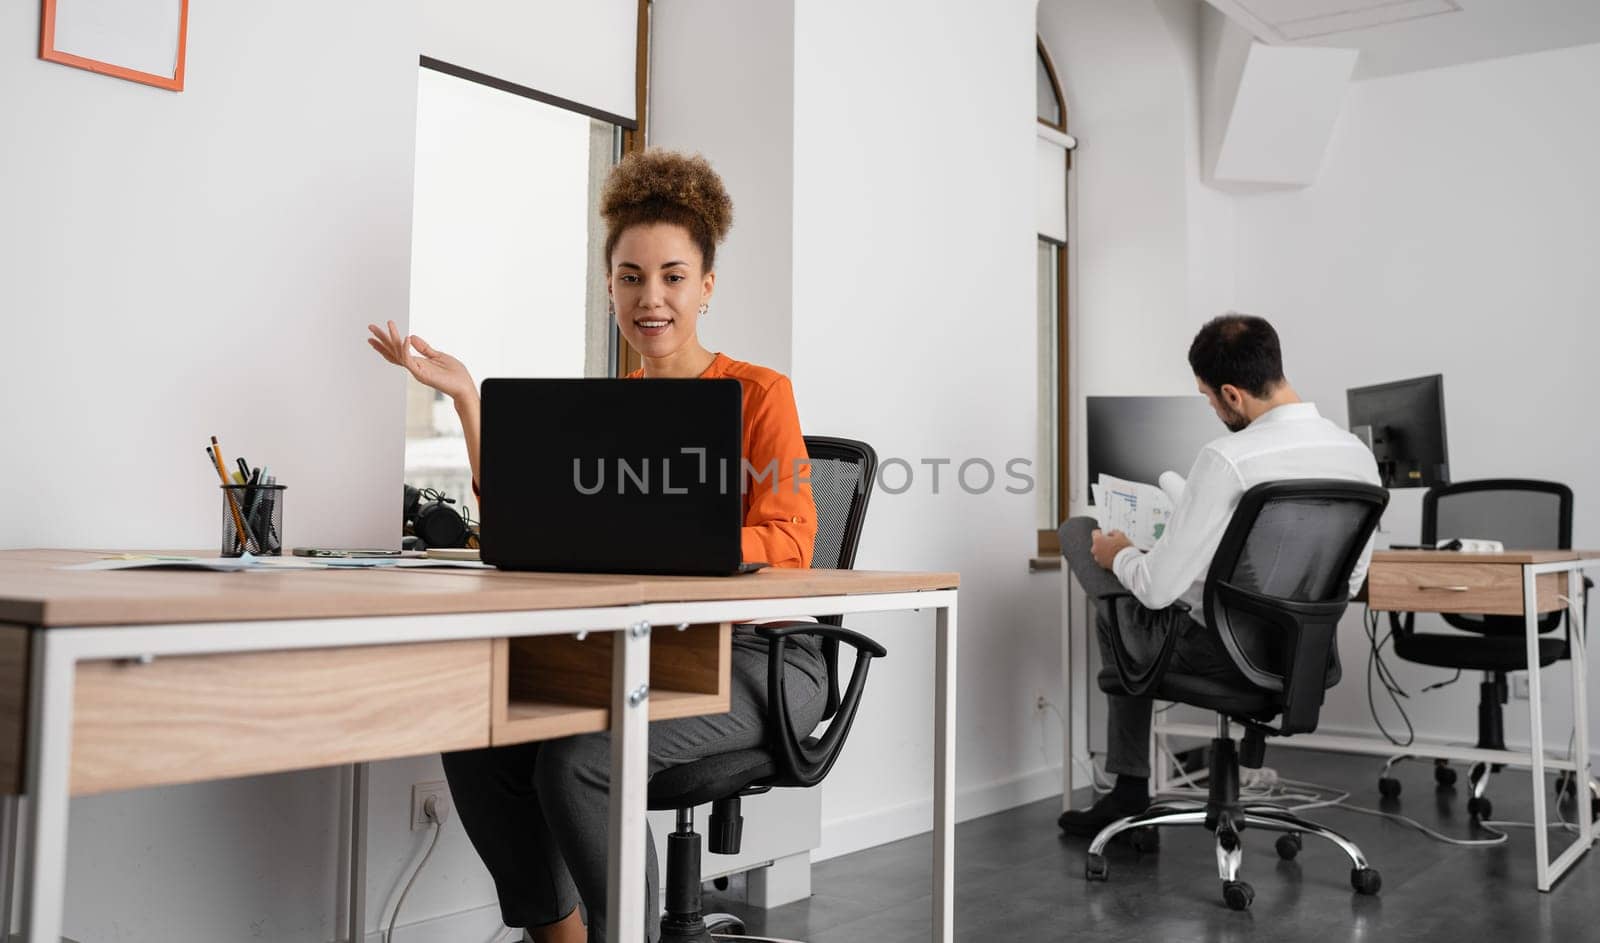 Two young businesspeople smiling while working with wireless technology in a modern workspace.